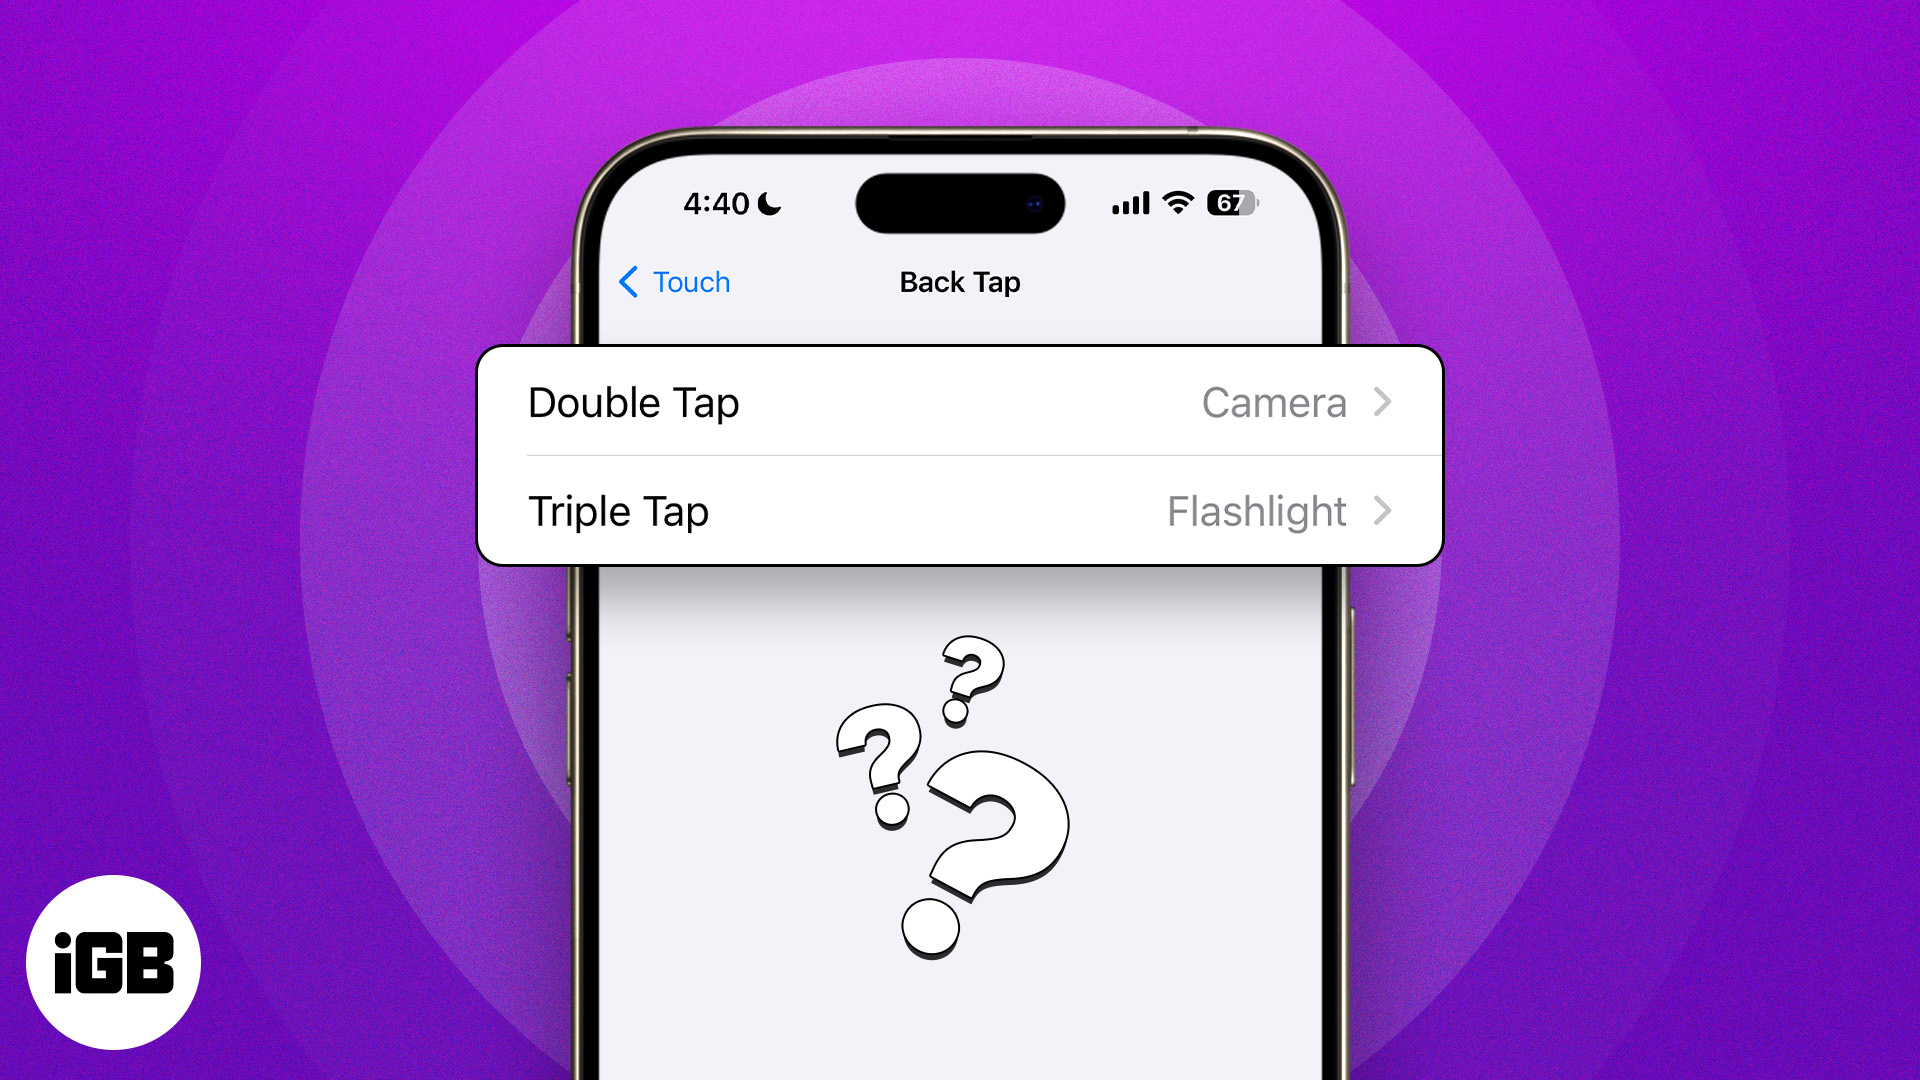 How to use Back Tap on iPhone (iOS 17 updated)